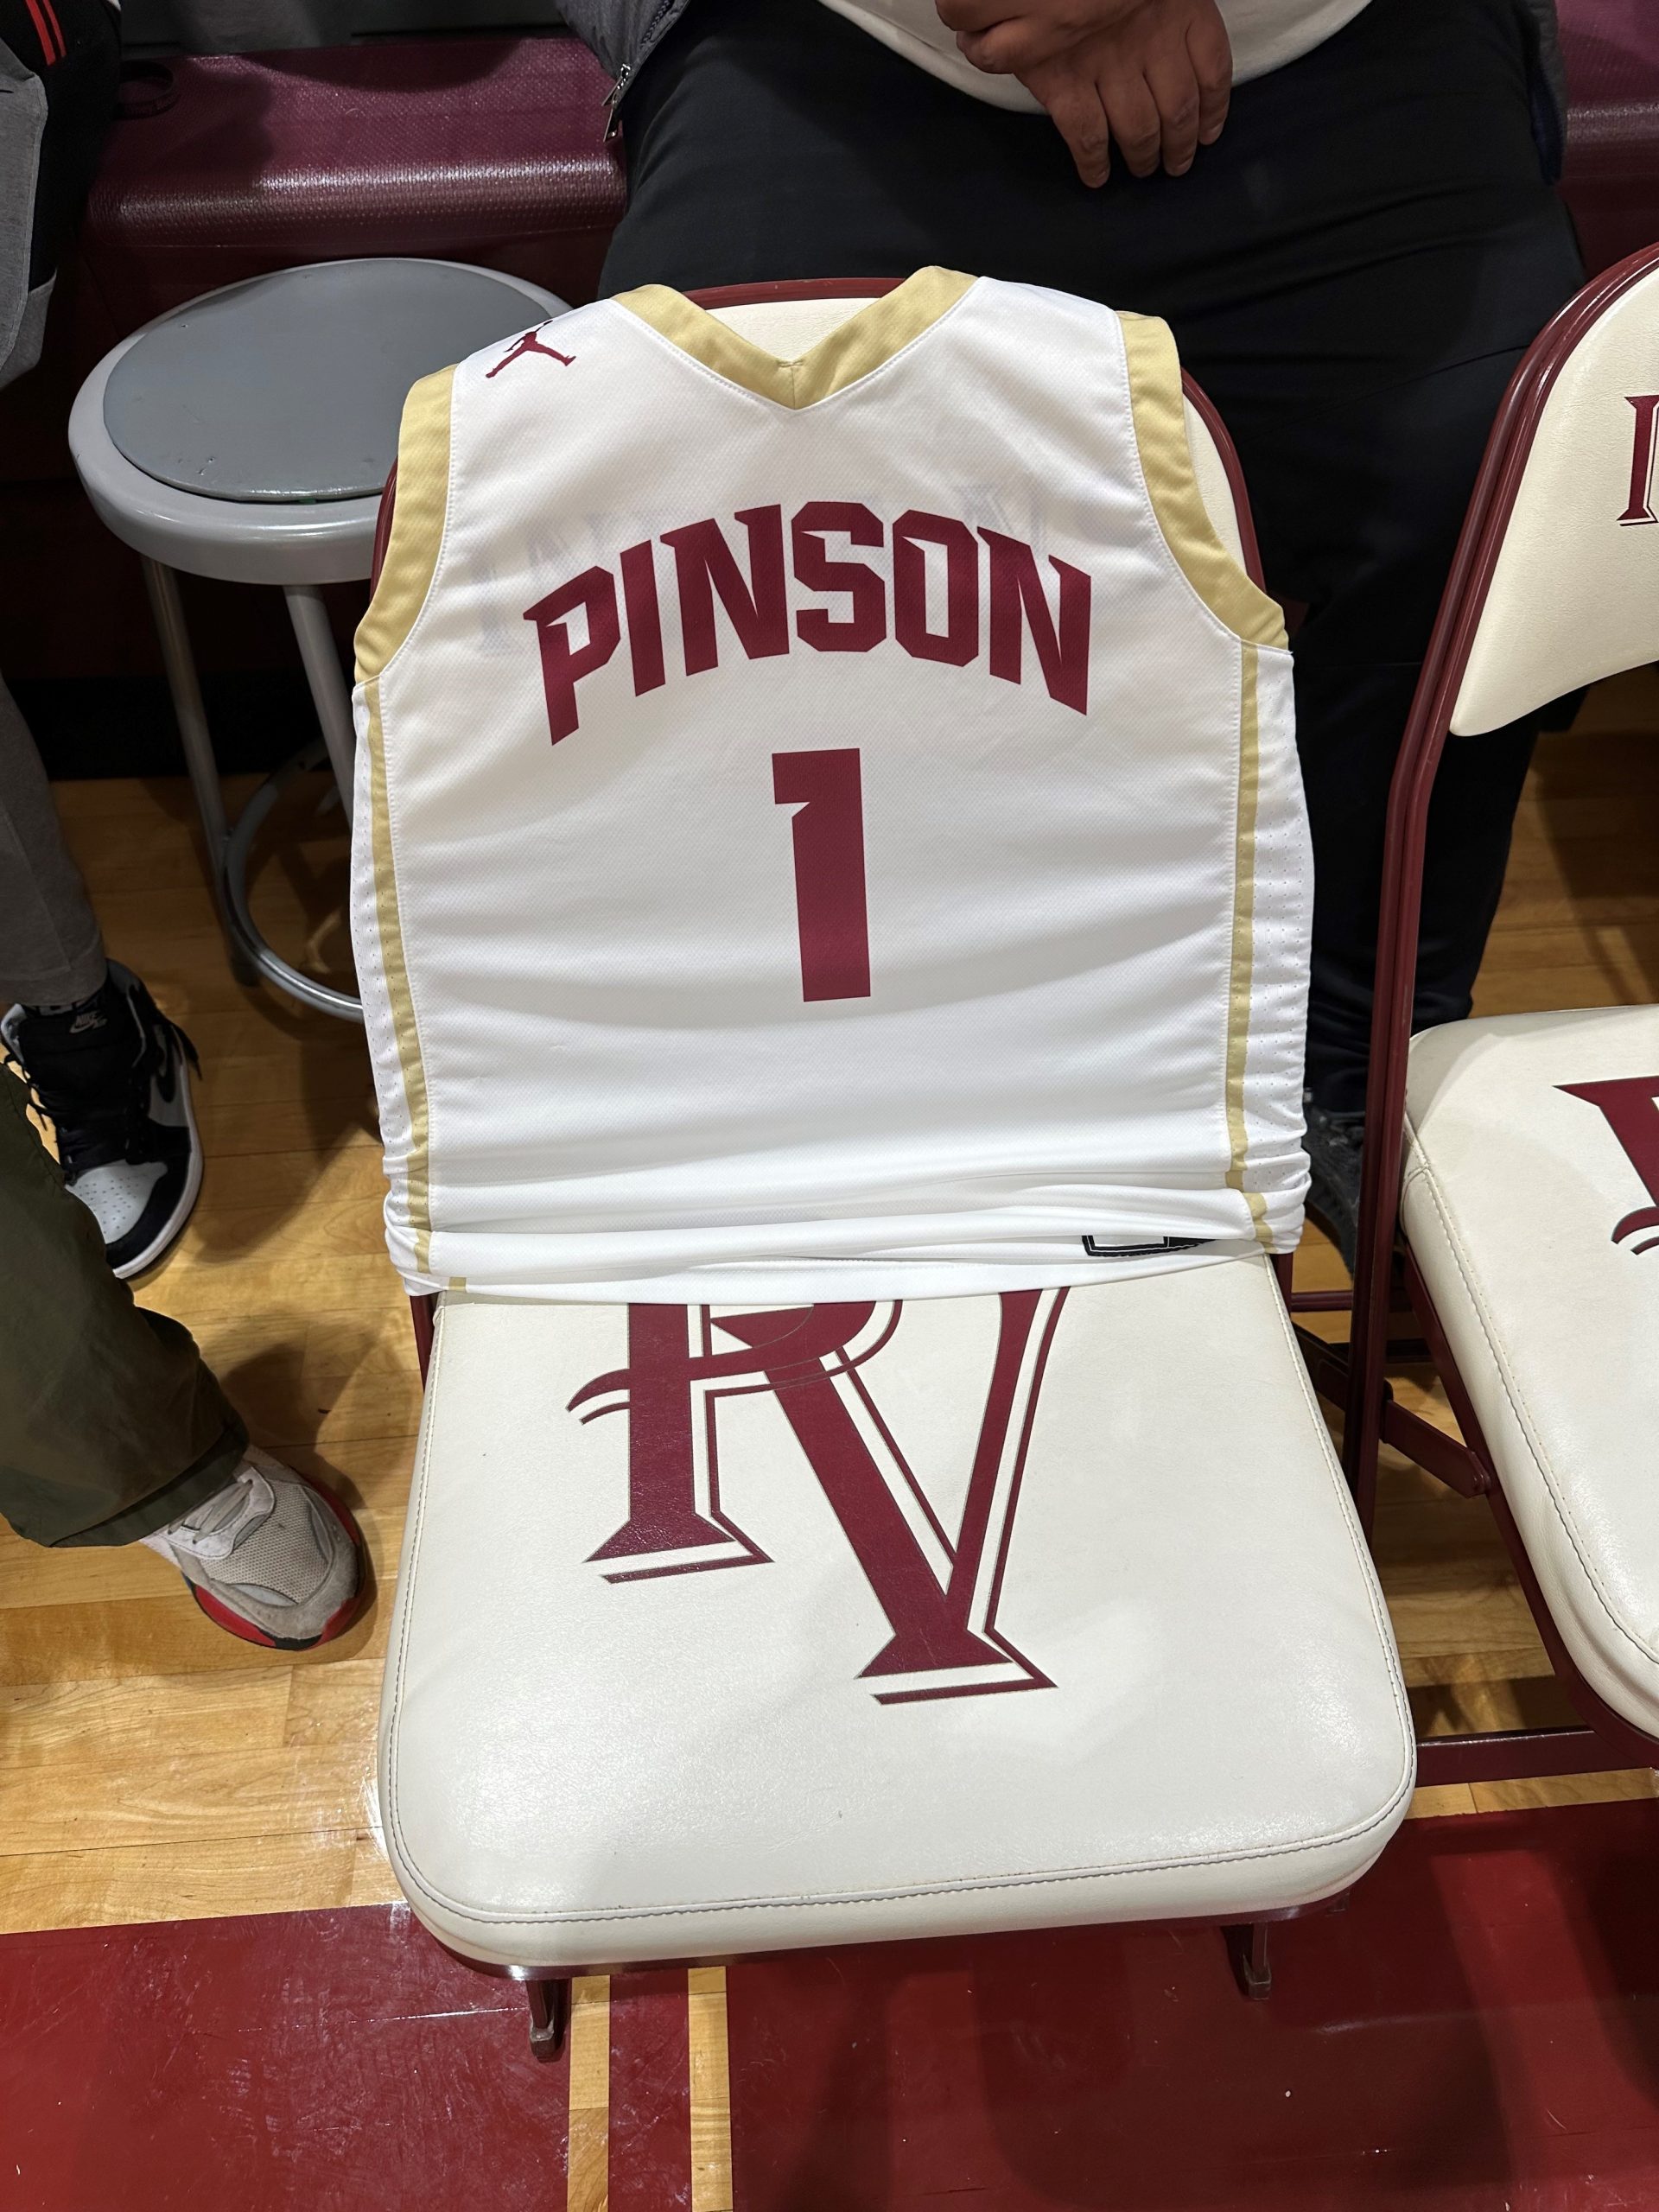 Pinson Valley remembers Caleb White, retires his jersey